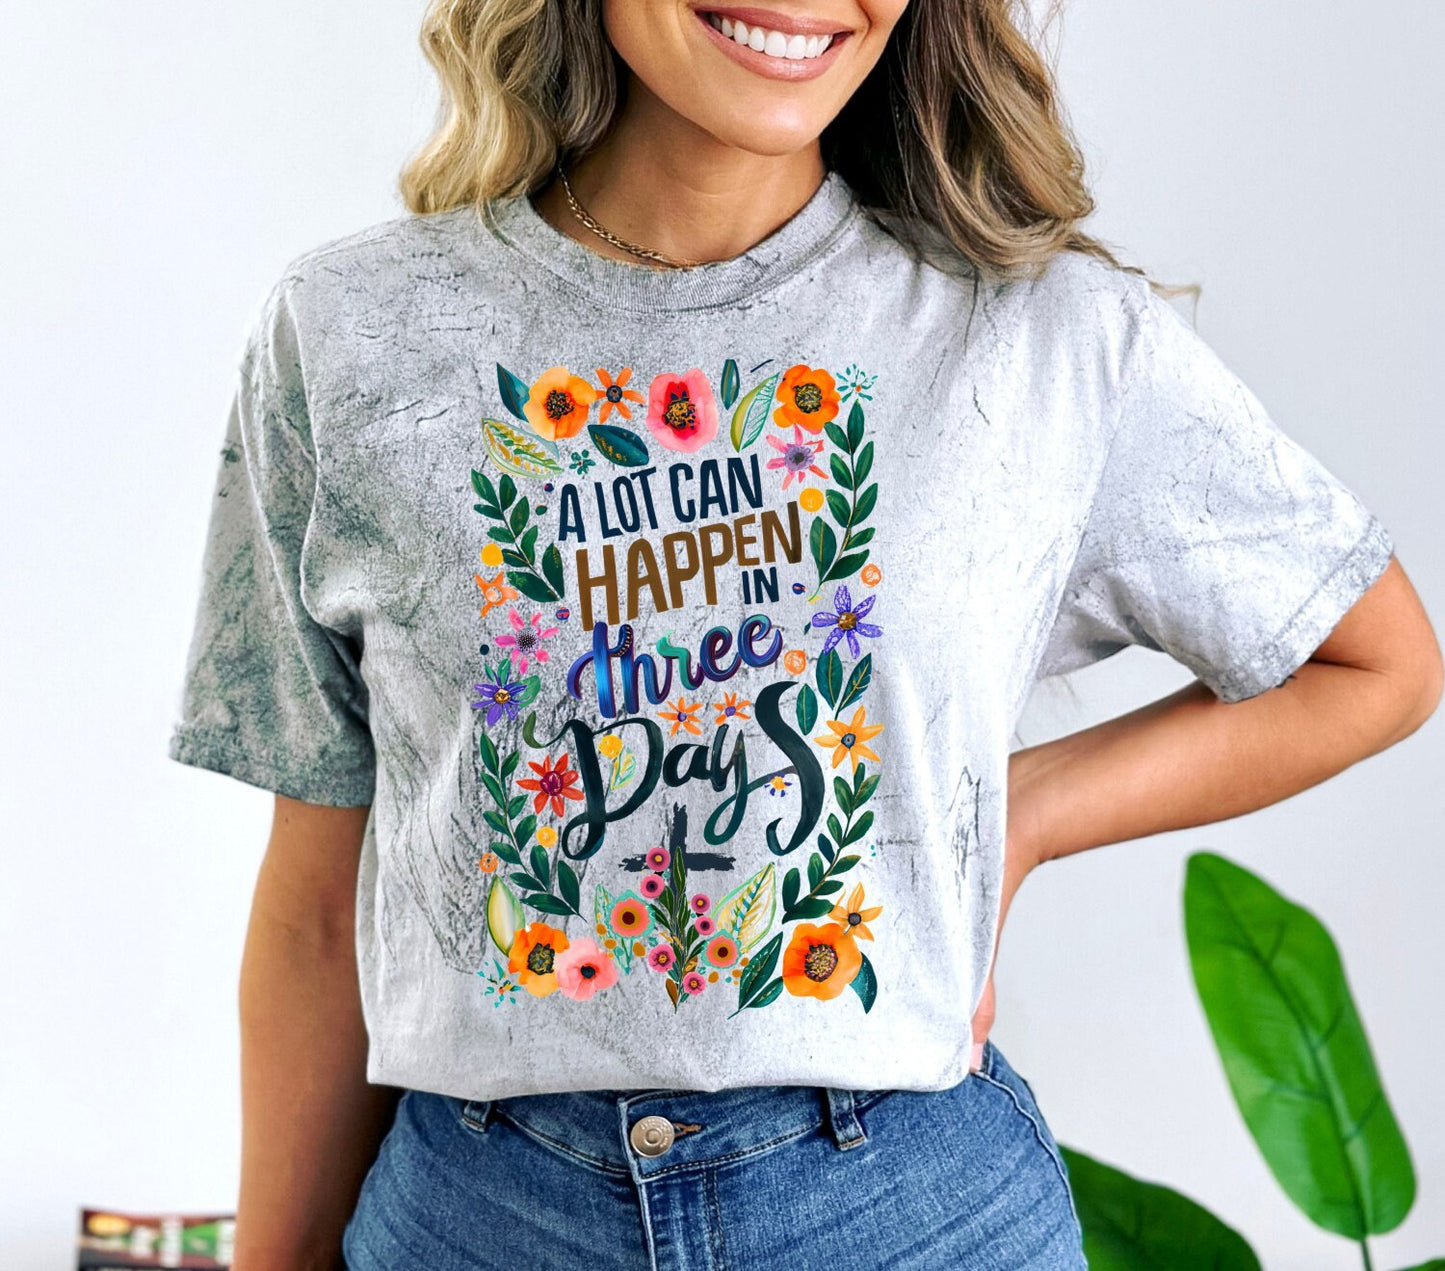 Christian Shirts Religious Tshirt Christian T Shirts Boho Christian Shirt Bible Verse Shirt A Lot Can Happen In 3 Days Floral Shirt